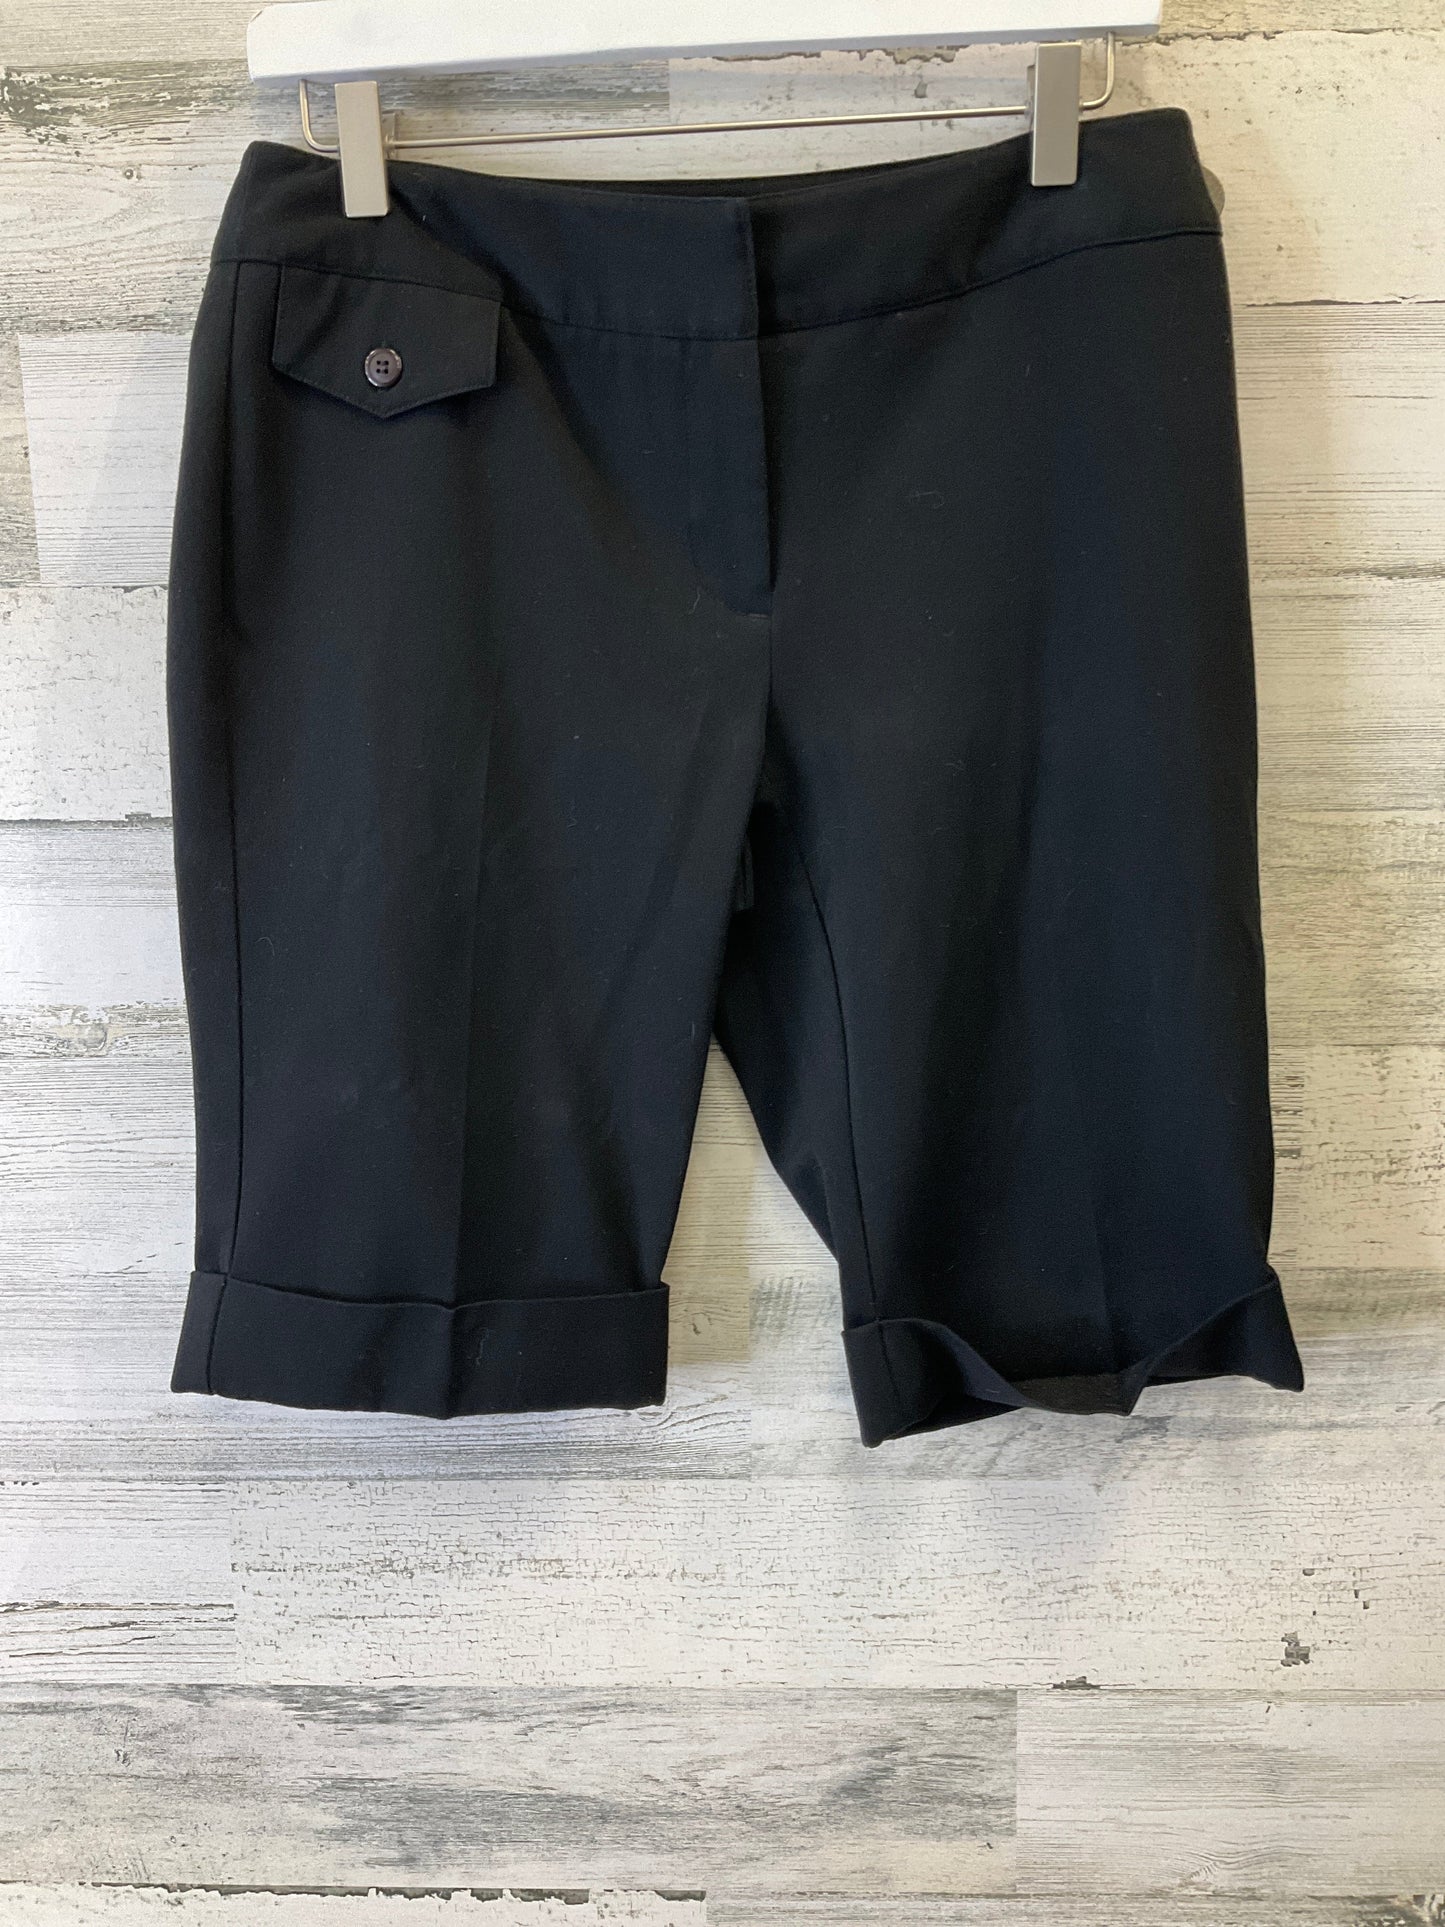 Black Shorts Style And Company, Size 4